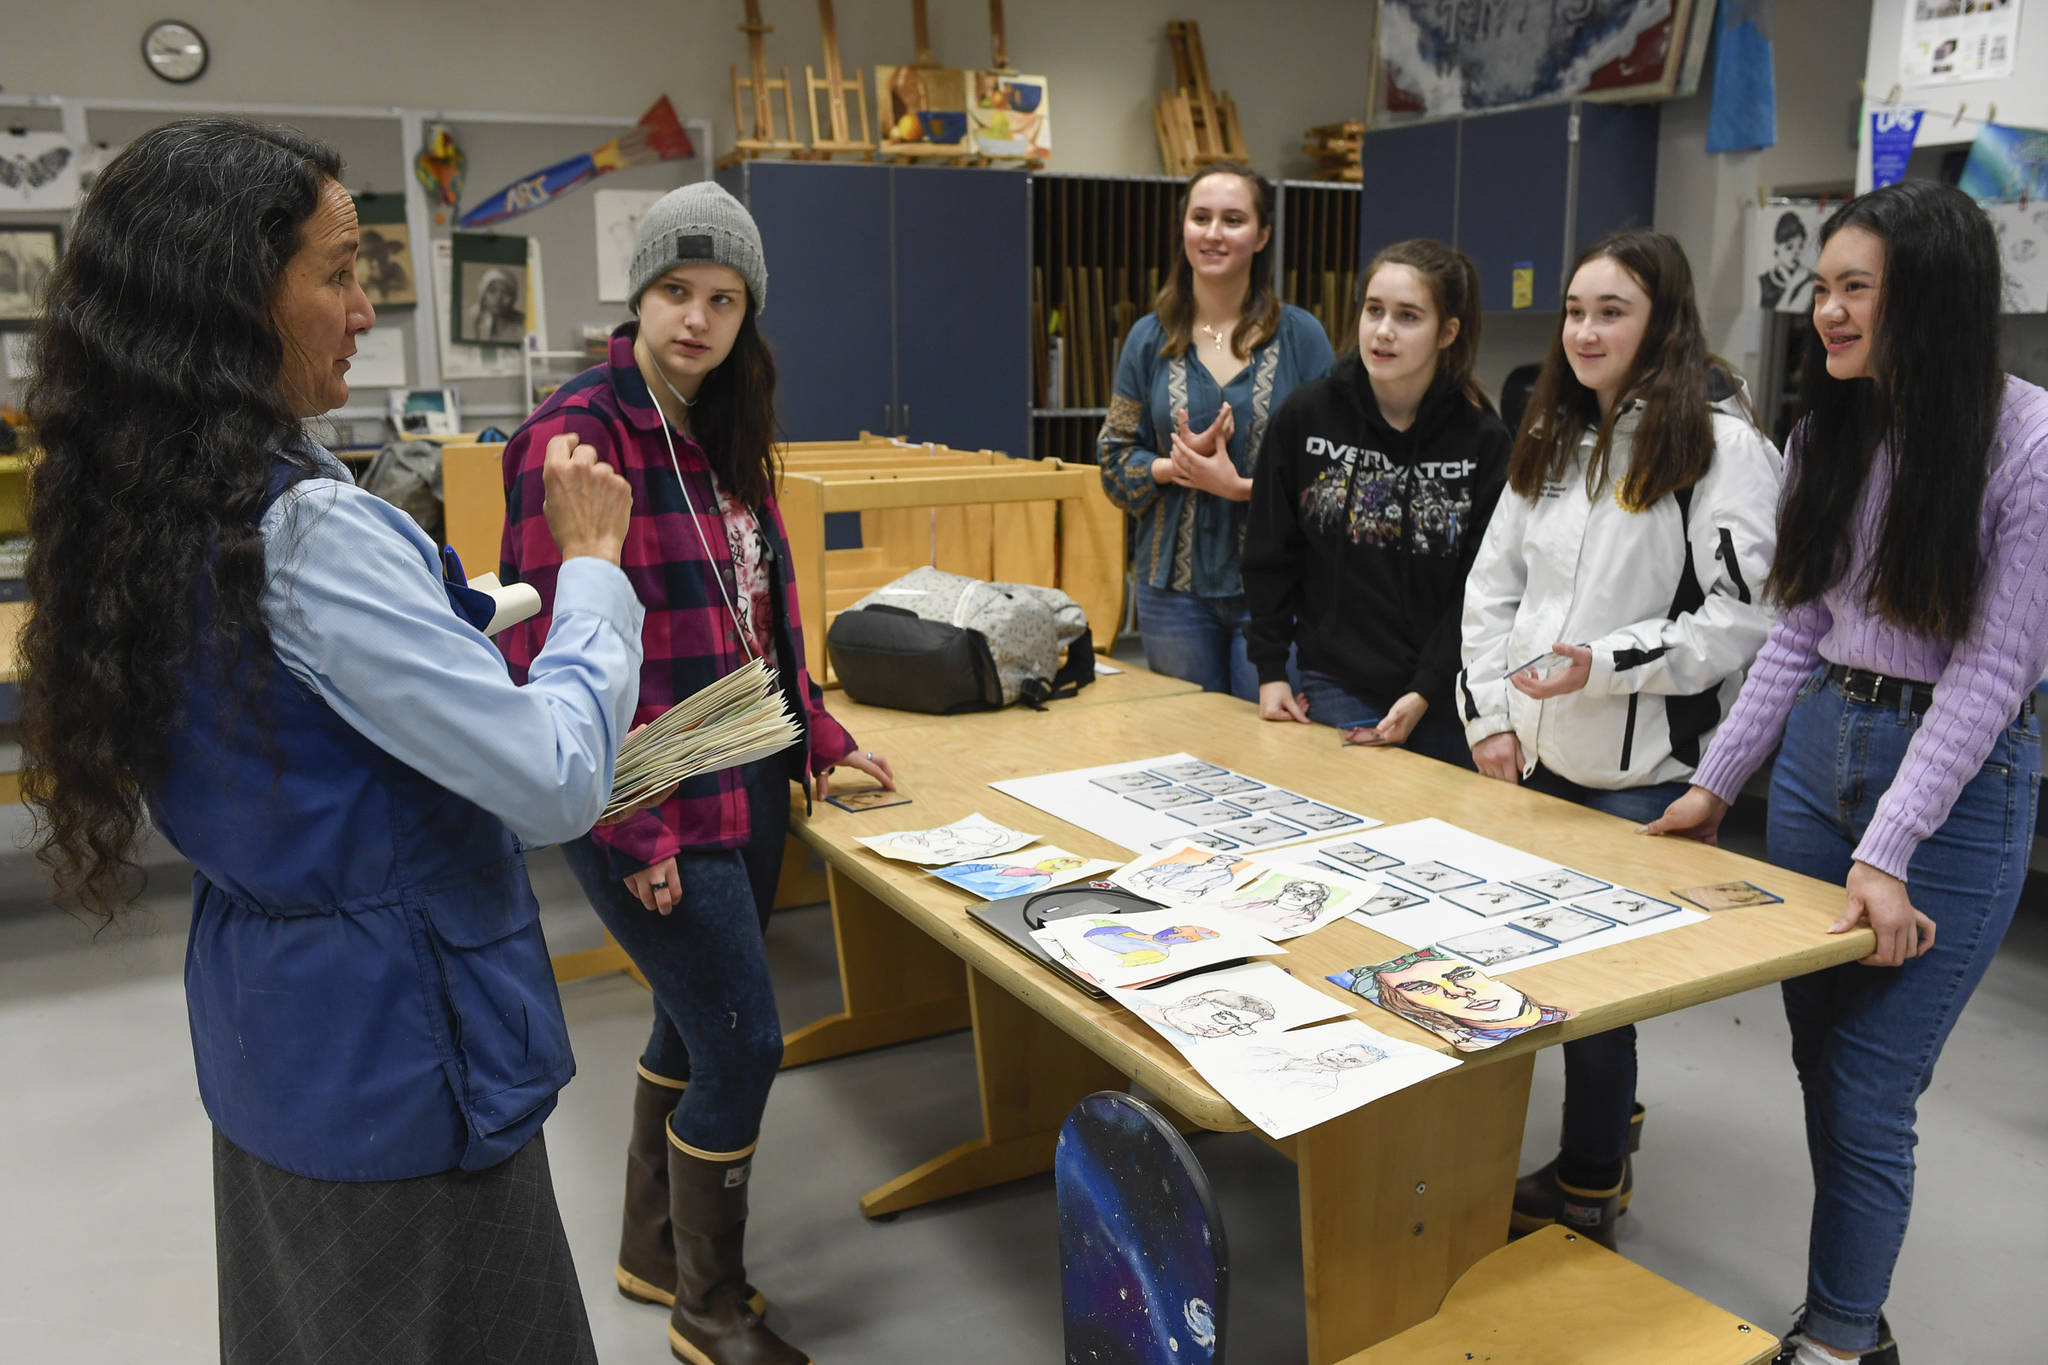 Art teacher Angela Imboden, left, talks to students Catherine Ackerman, second from left, Madison Kahle, Tyler Johnson, Alina Renz and Tianah Sangster on Wednesday, Jan. 30, 2019, who participated in a blind contour drawing project and received a signed drawing of a deer’s head on plexiglass by professional contour artist Ian Sklarsky. (Michael Penn | Juneau Empire)